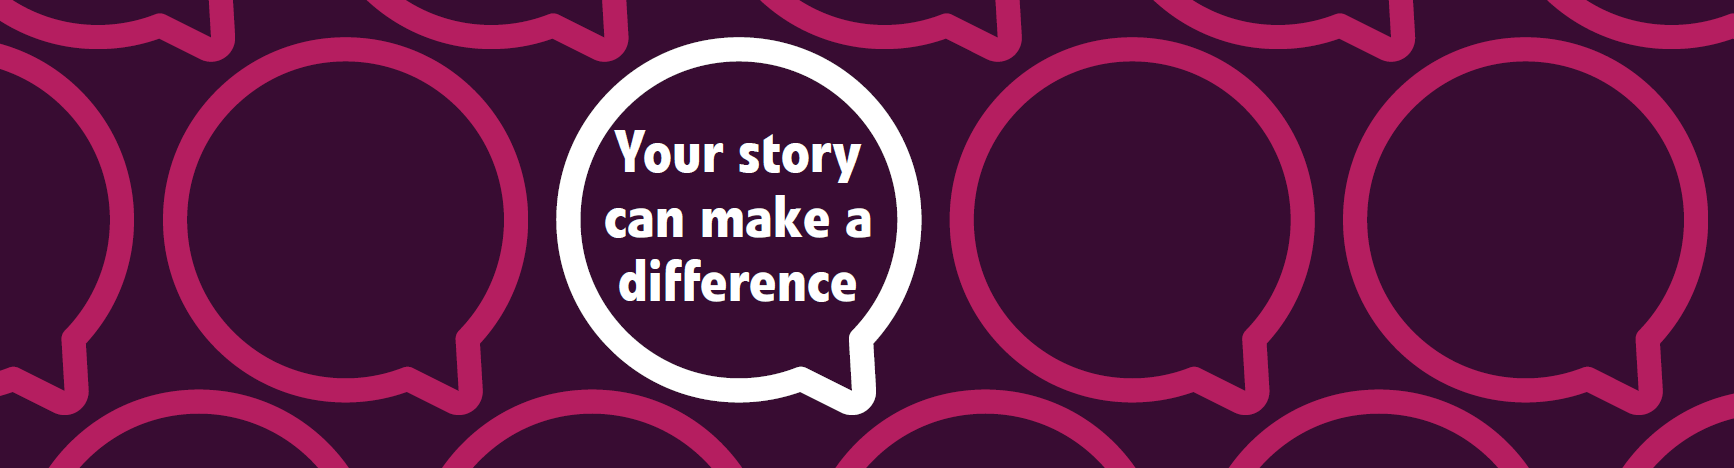 Care Opinion speech bubble design, your story can make a difference